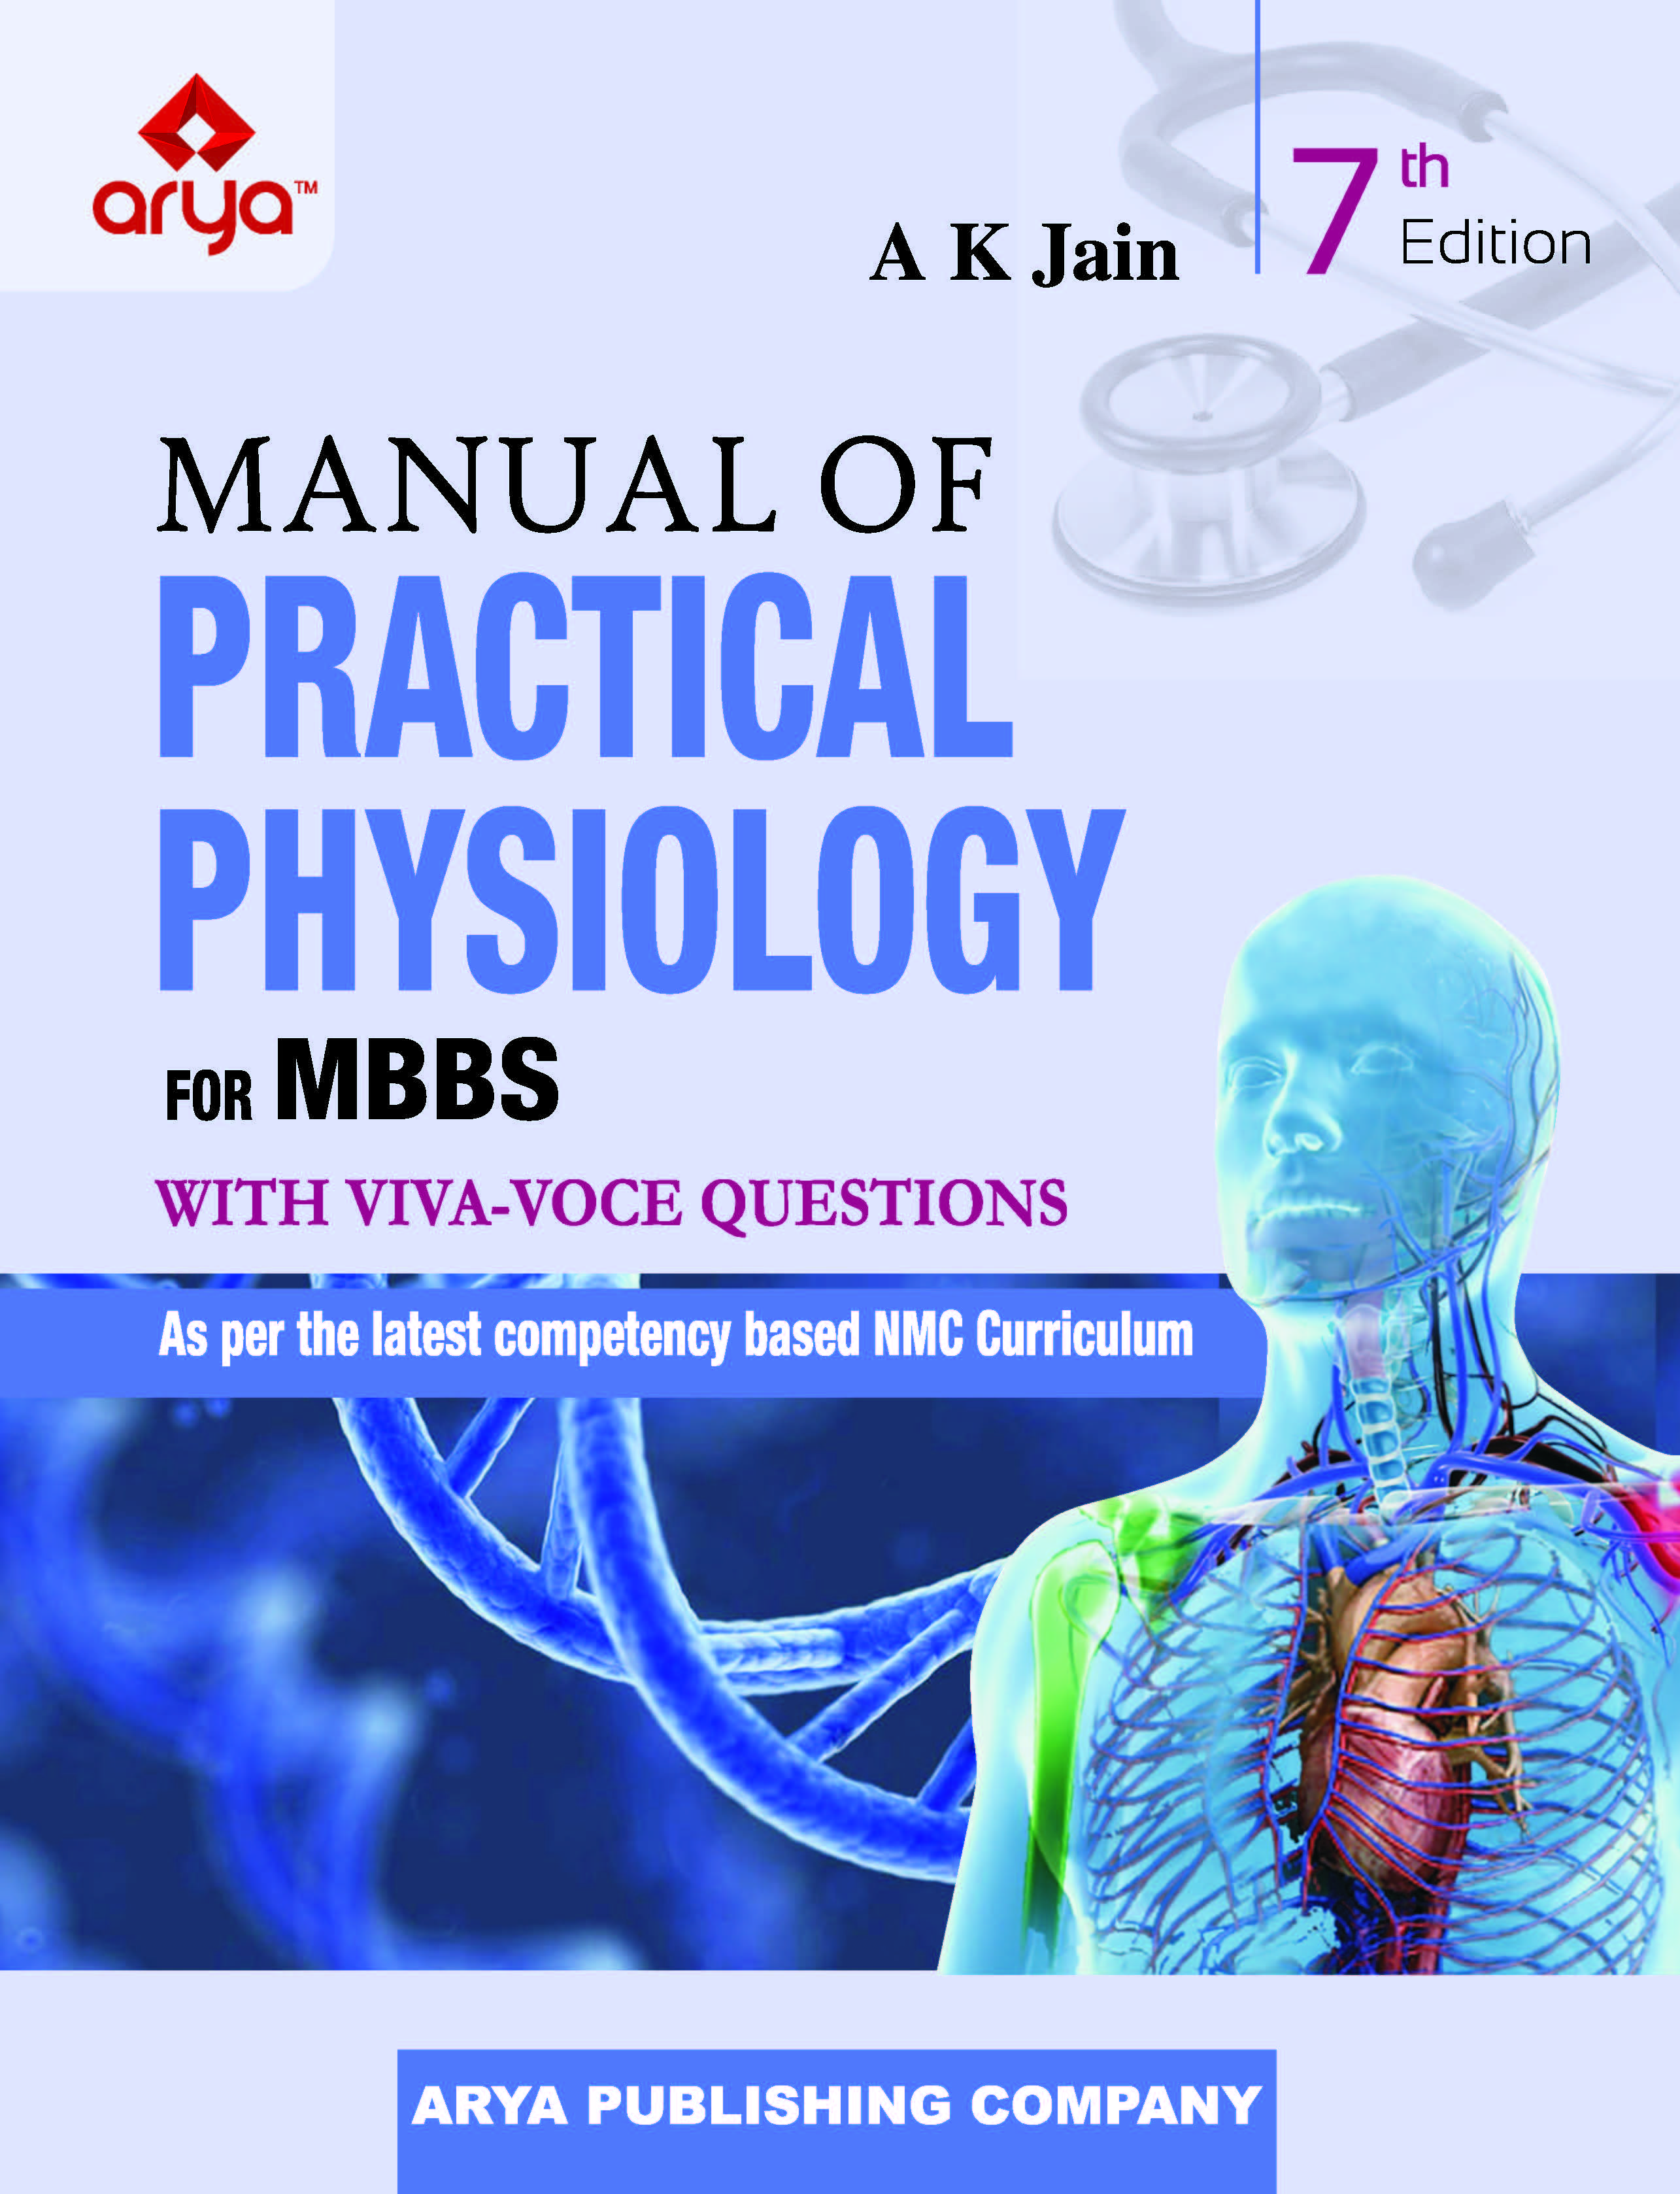 Manual of Practical Physiology for MBBS (with Viva-Voce Questions)  